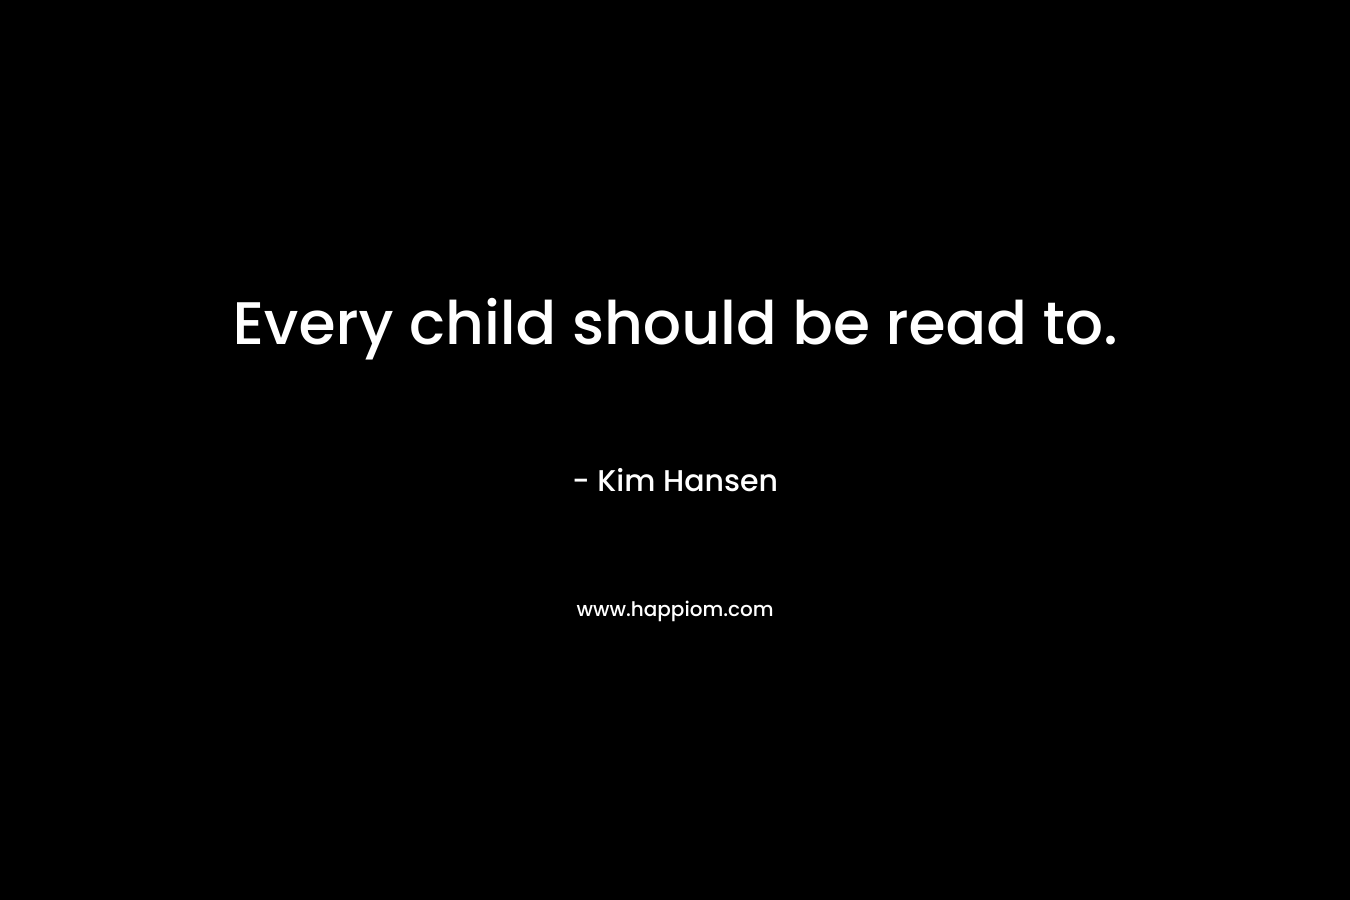 Every child should be read to.